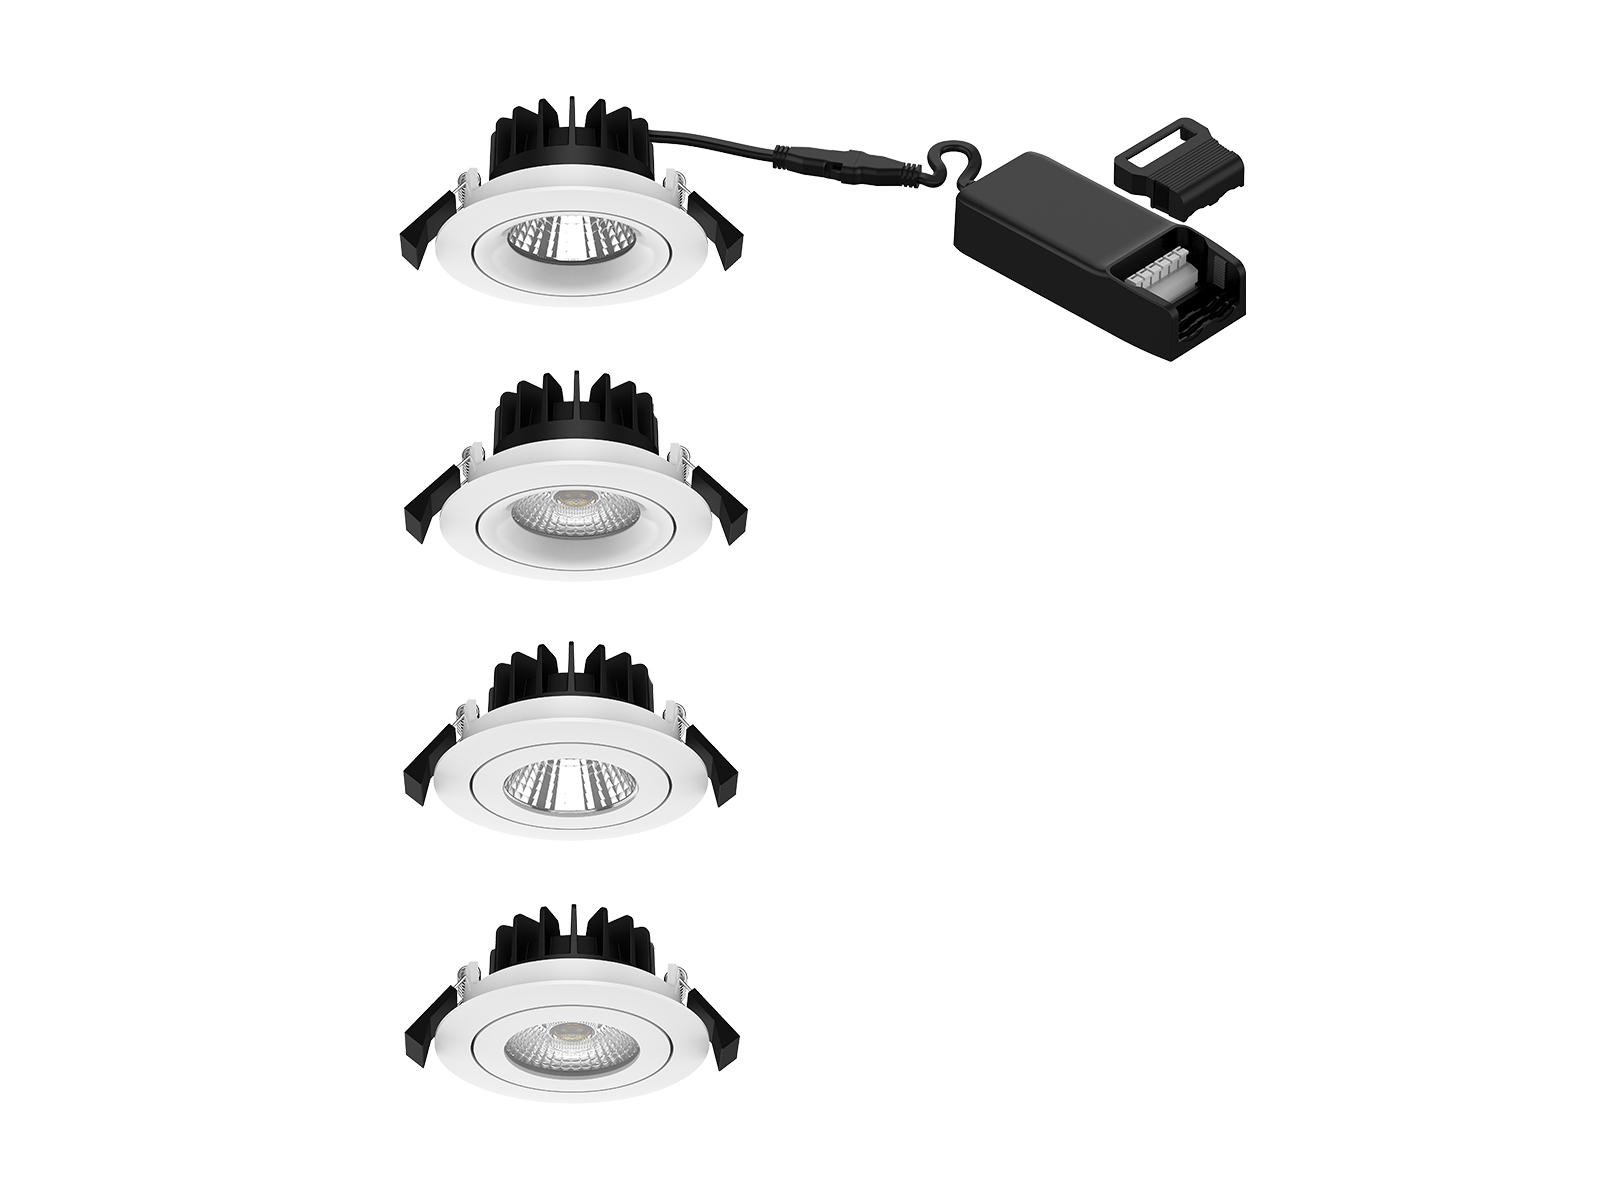 CL117AB downlight spring clip instructions